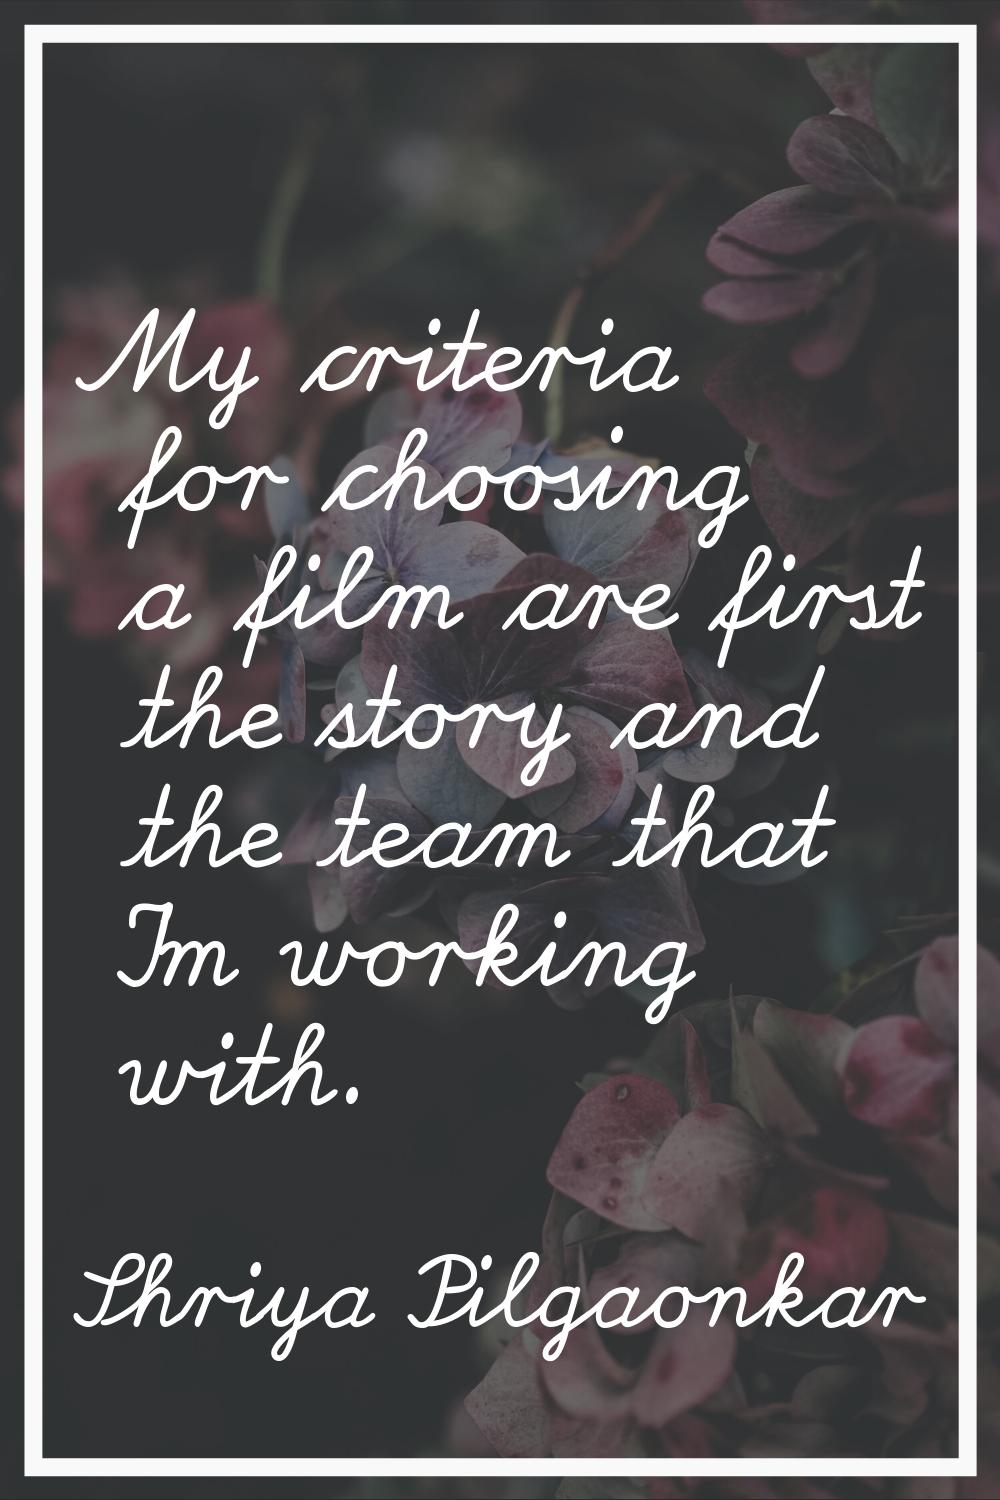 My criteria for choosing a film are first the story and the team that I'm working with.